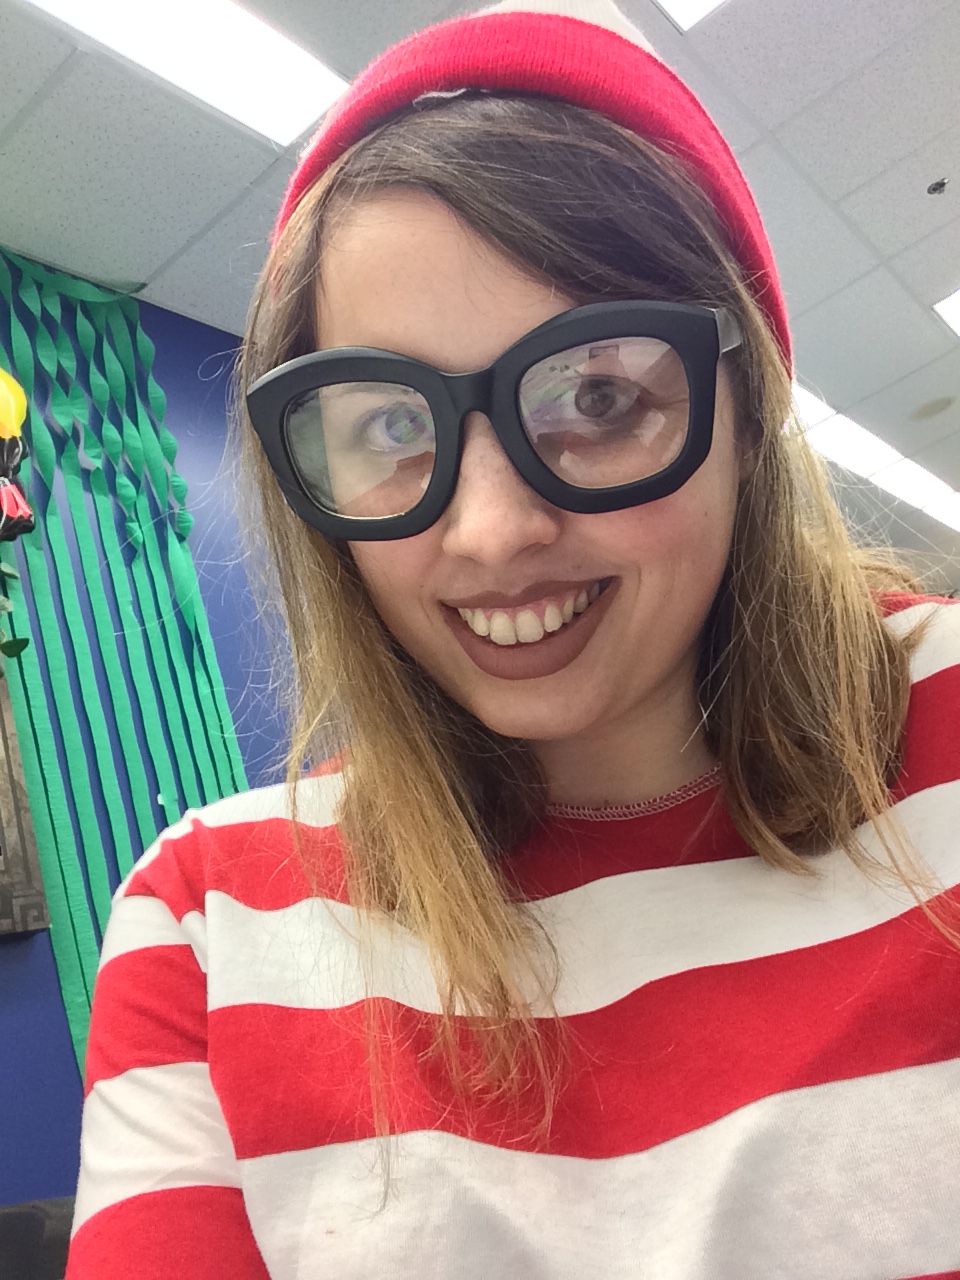 [Image is me wearing a "Where's Waldo" Halloween costume complete with the hat, glasses and the shirt]